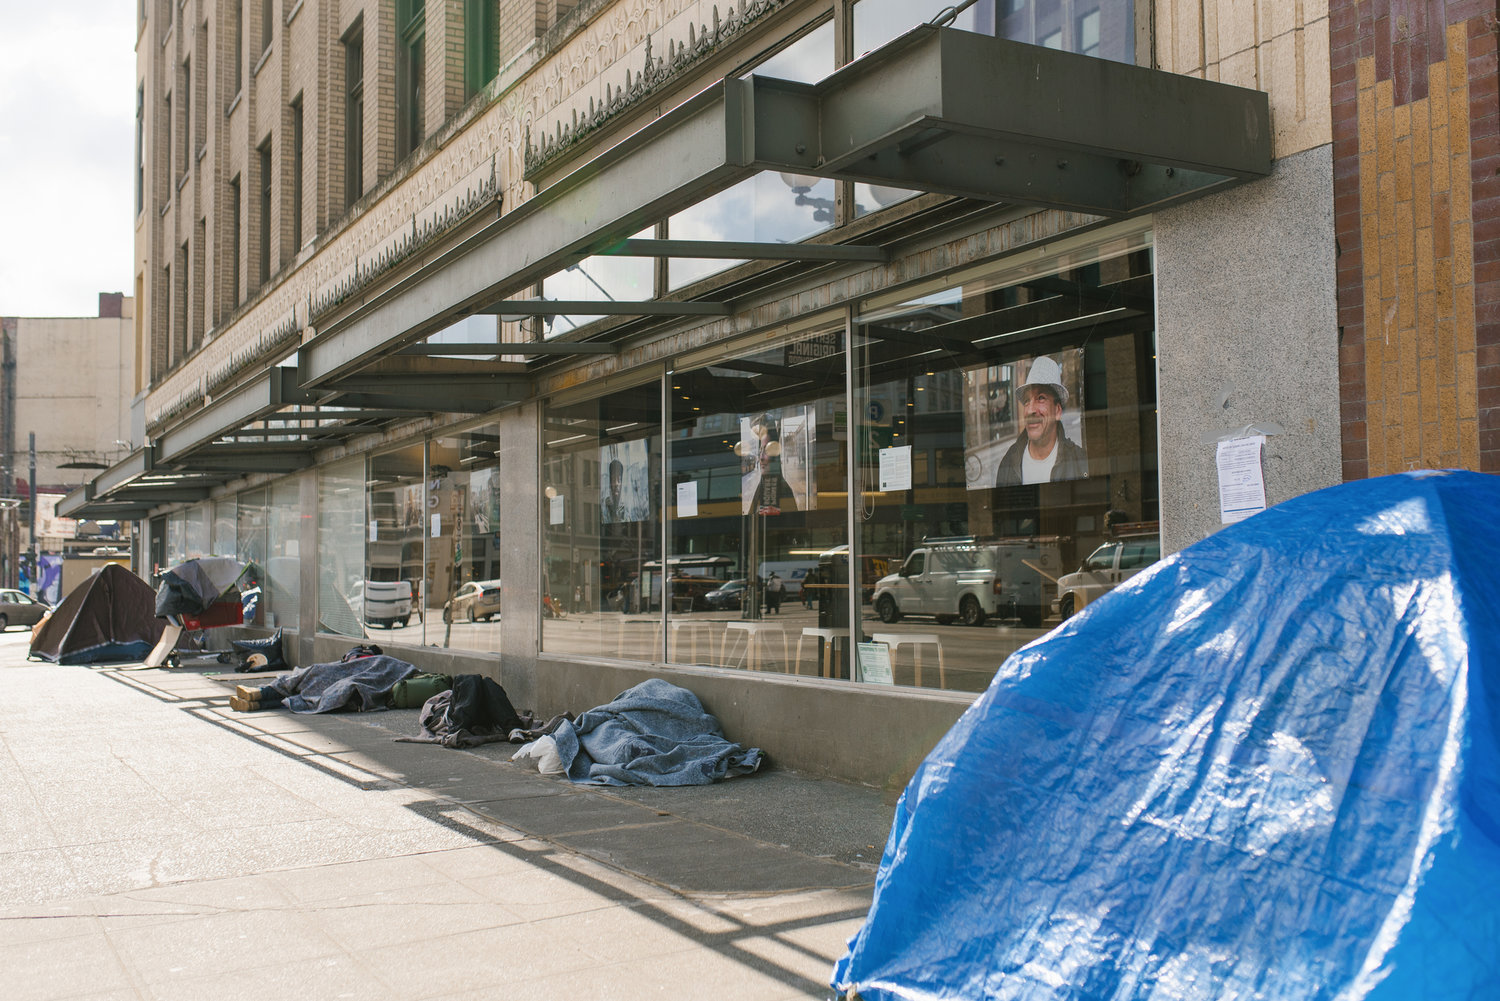 The tents of homeless people in downtown Seattle are shown directly outside a retailer's windows.